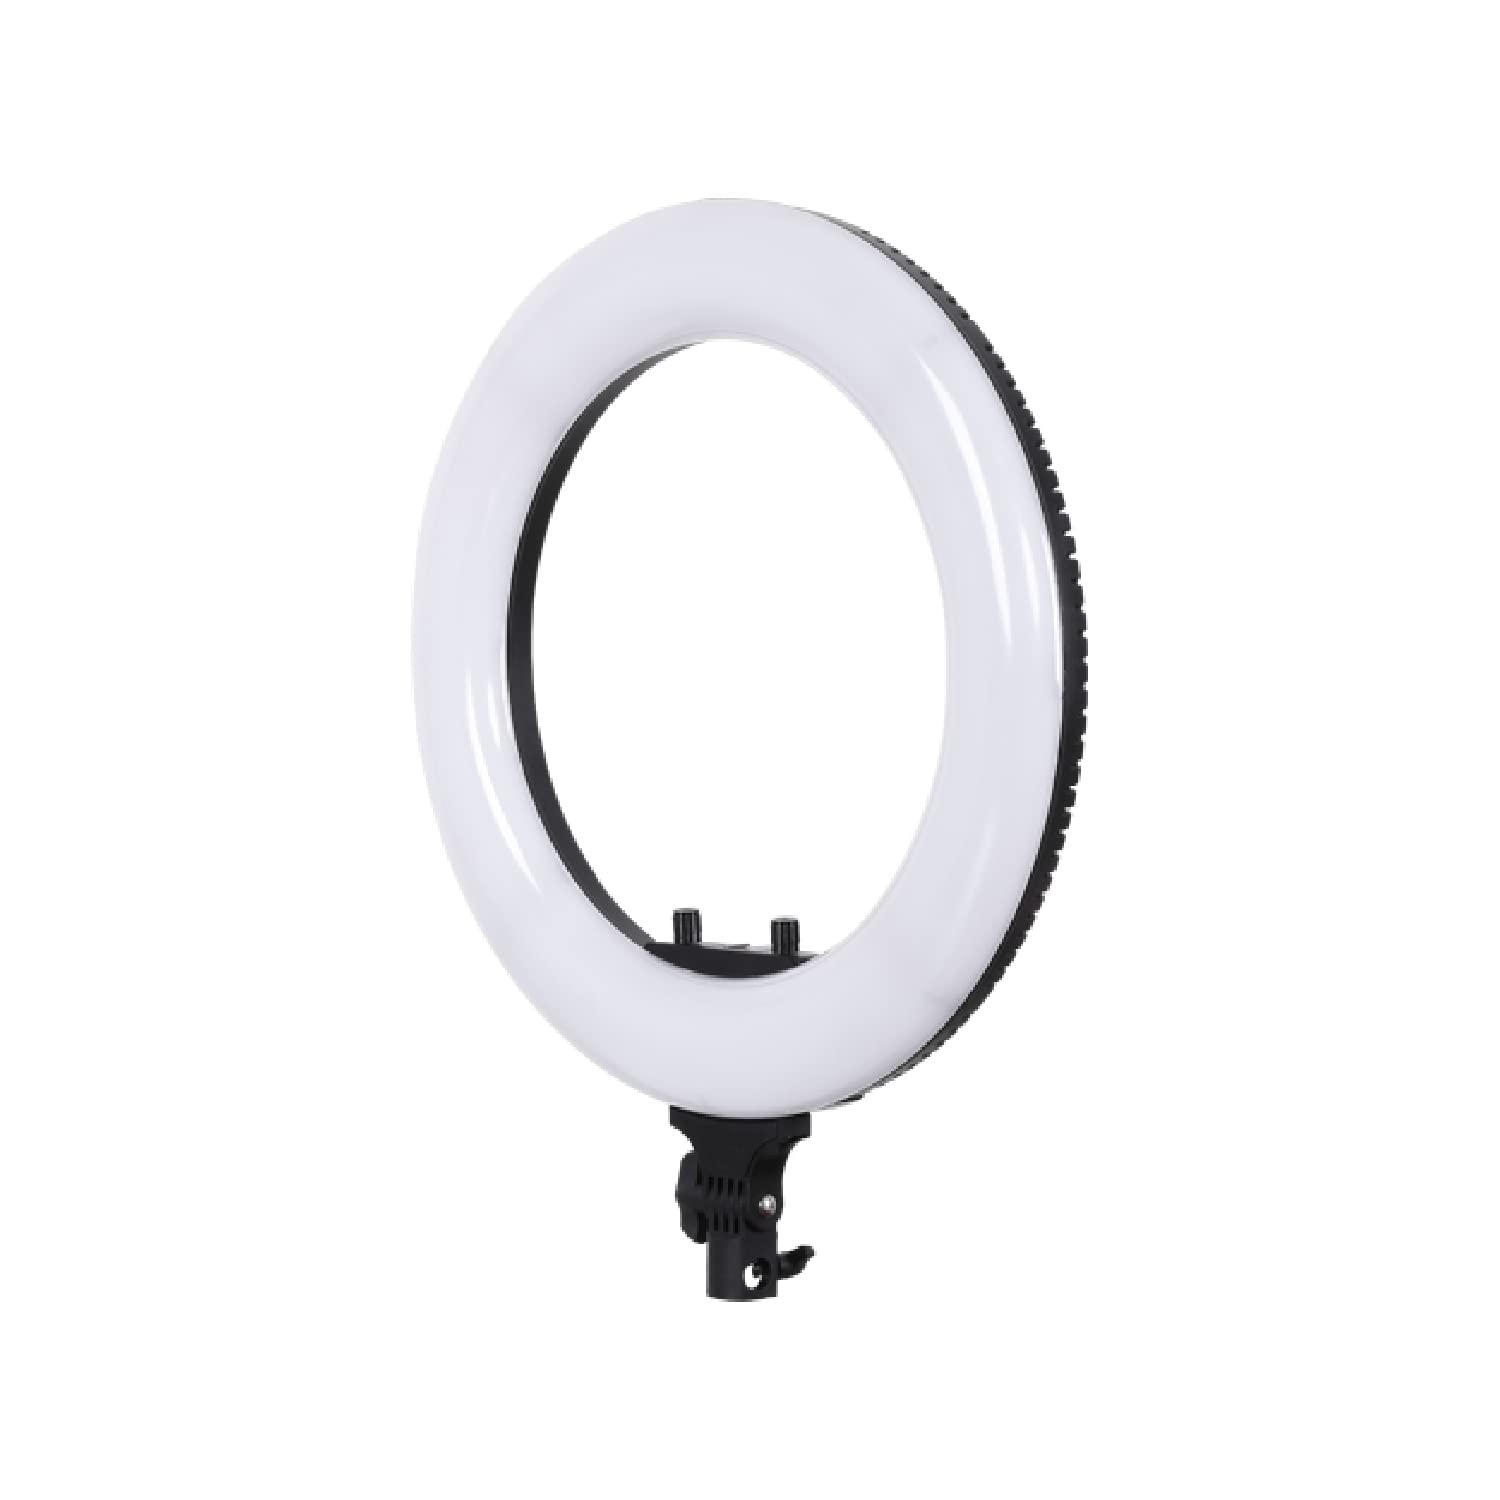 Digitek (DPRL-18) Platinum (Brighter than Normal) Professional Big LED Ring Light 46cm (18inch) with Powerful 432 Pcs SMD LED & 2 Color Temperature for YouTube Streaming, Photo Video shoot, Makeup & more - Digitek